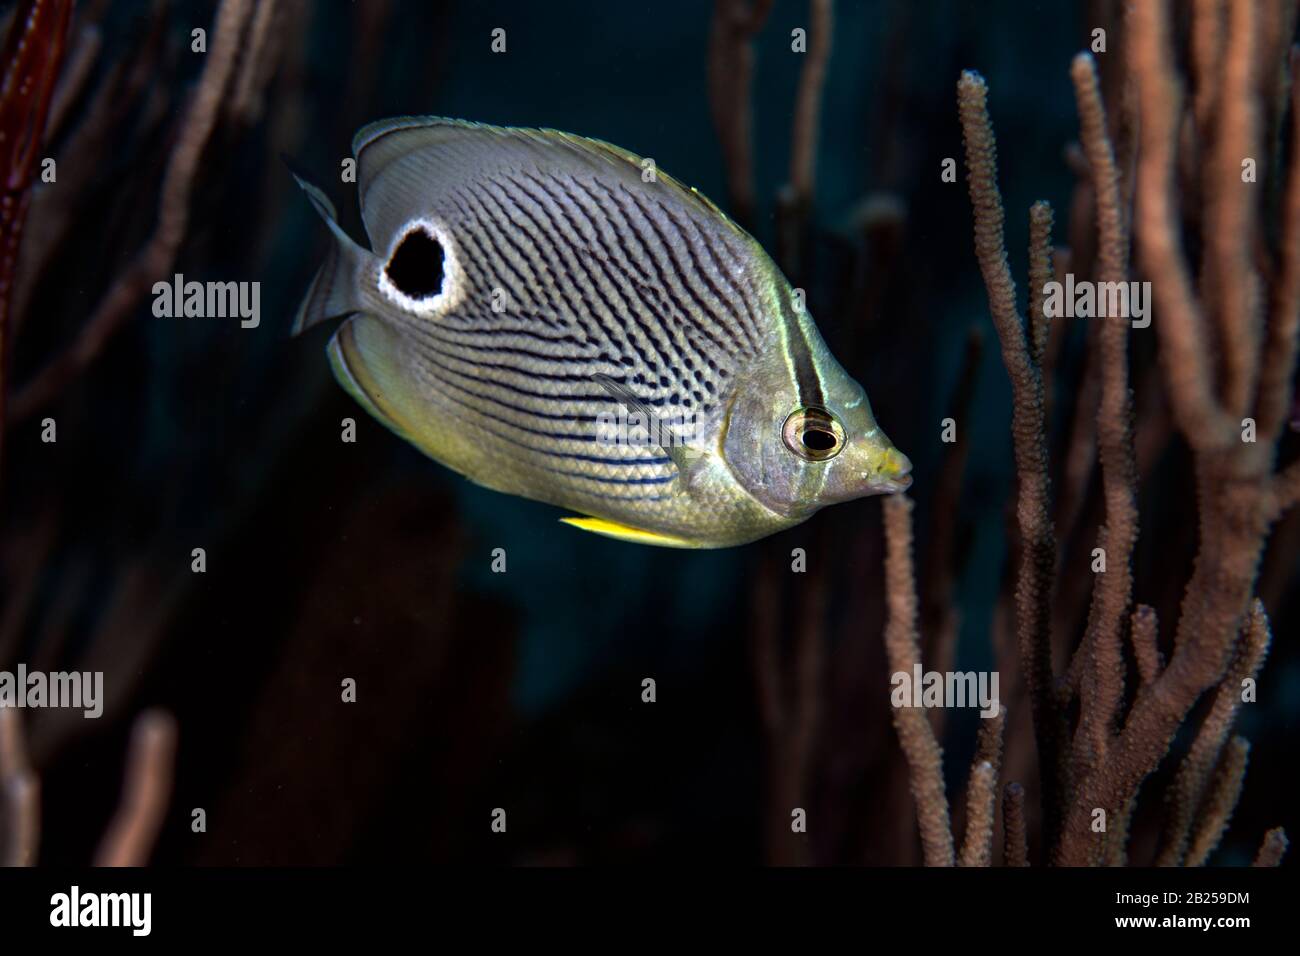 A foureye butterflyfish, Chaetodon capistratus, on the reef in Bonaire, The Netherlands. Stock Photo